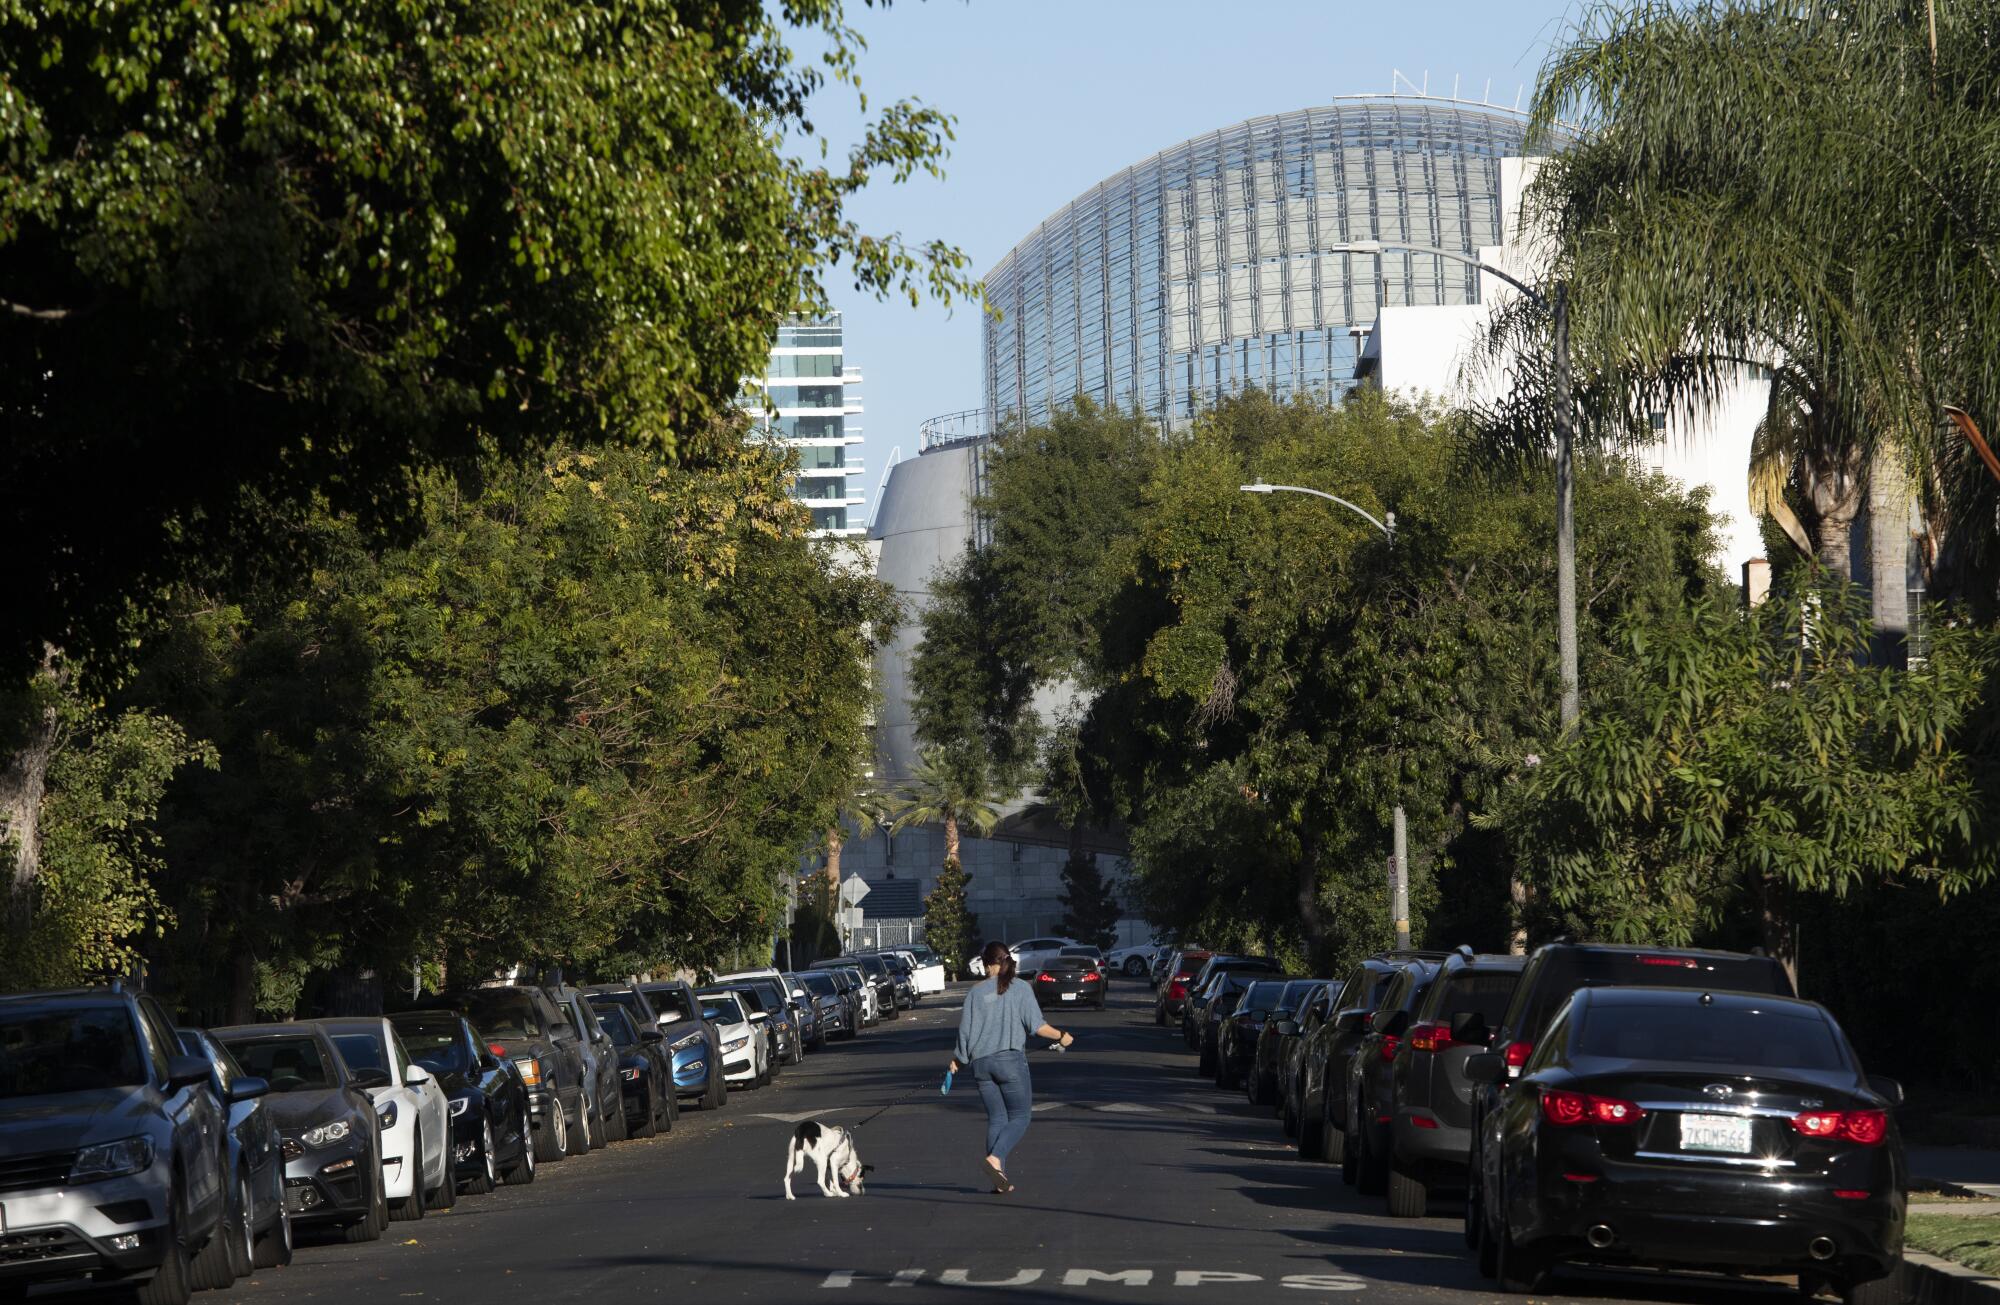 A woman walks her dog on a tree-lined residential street, at the end of which looms the spherical Geffen Theater